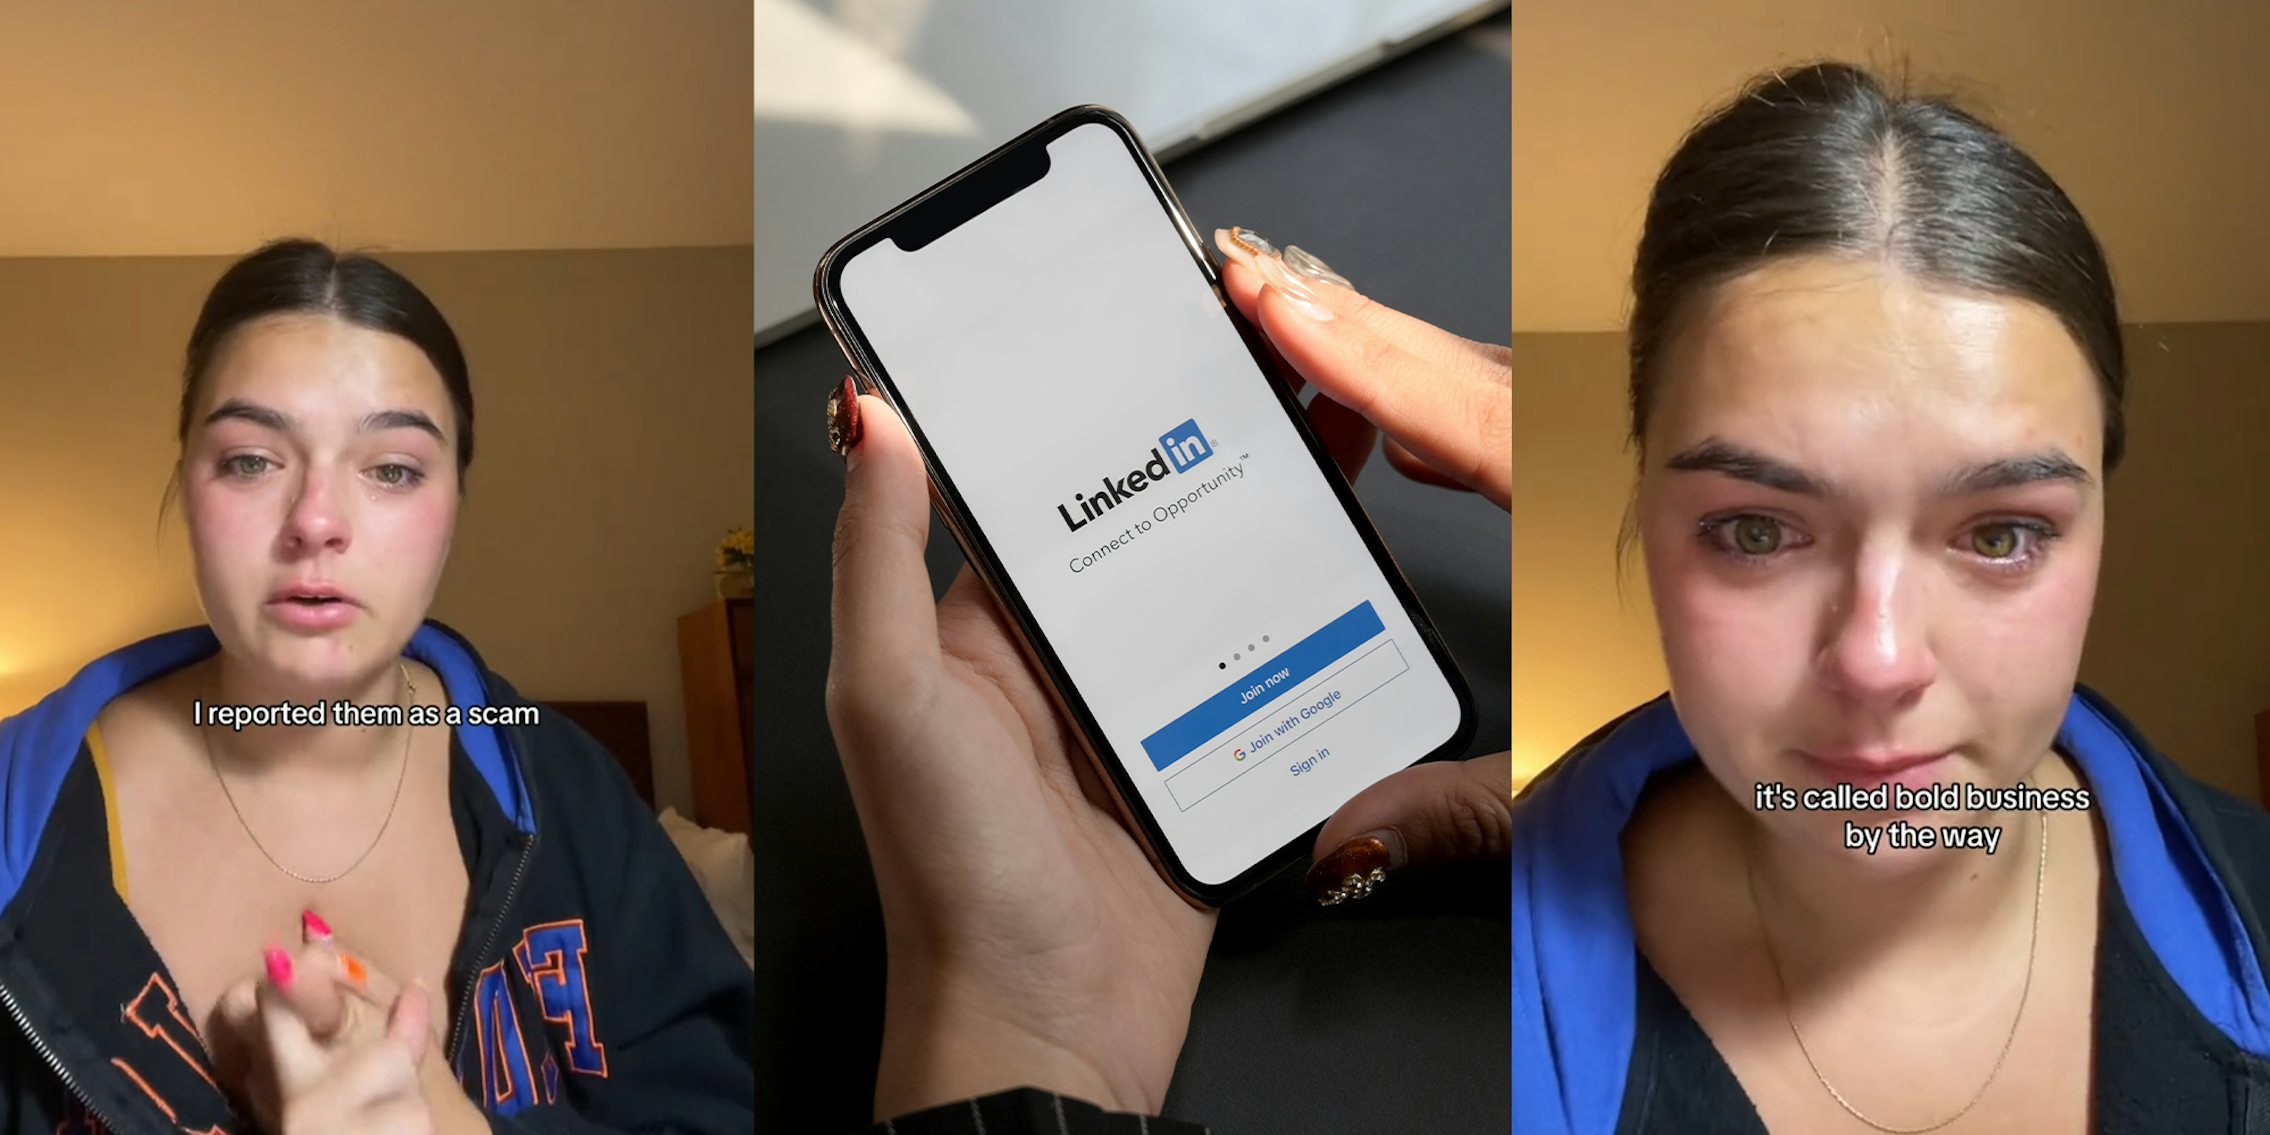 Young woman scammed through linkedin